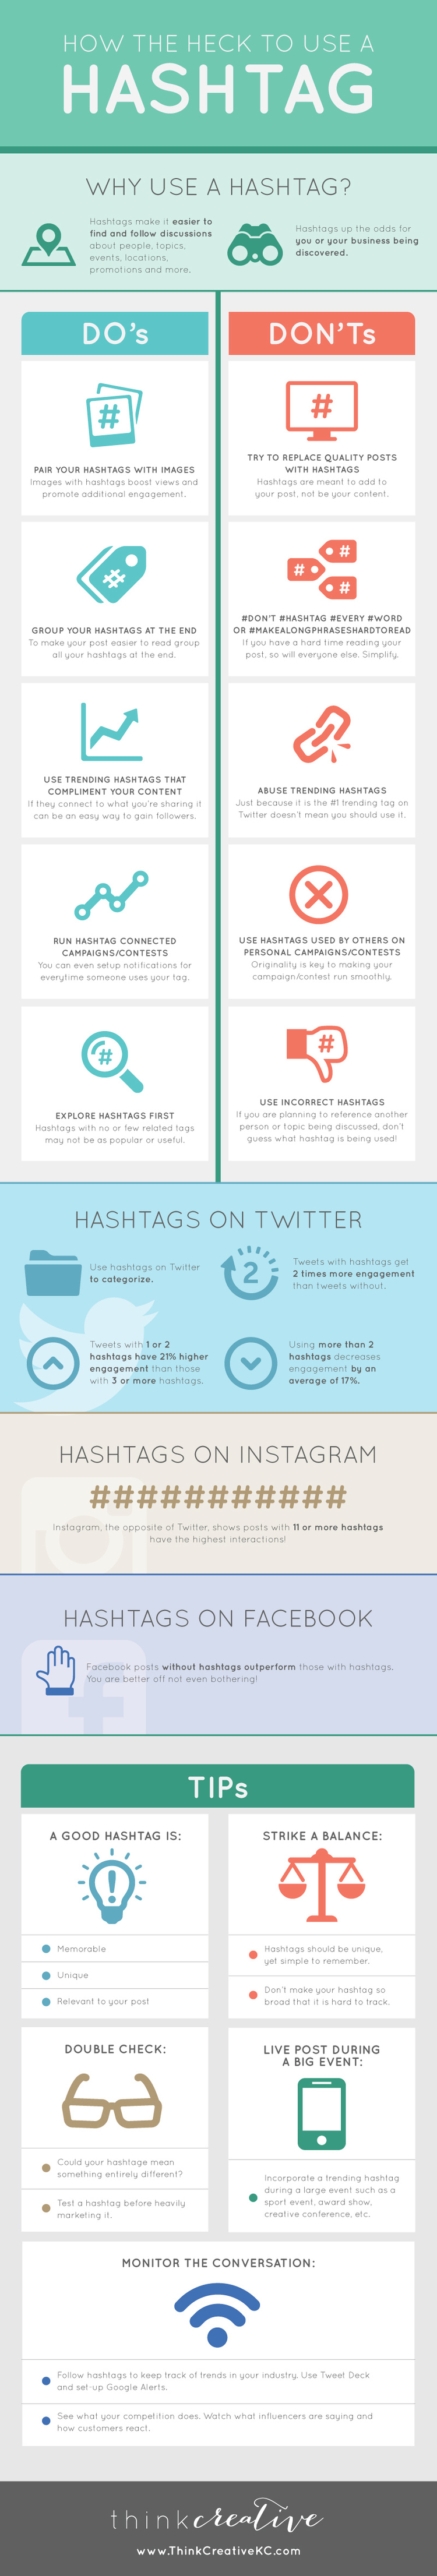 How to use a hashtag Infographic